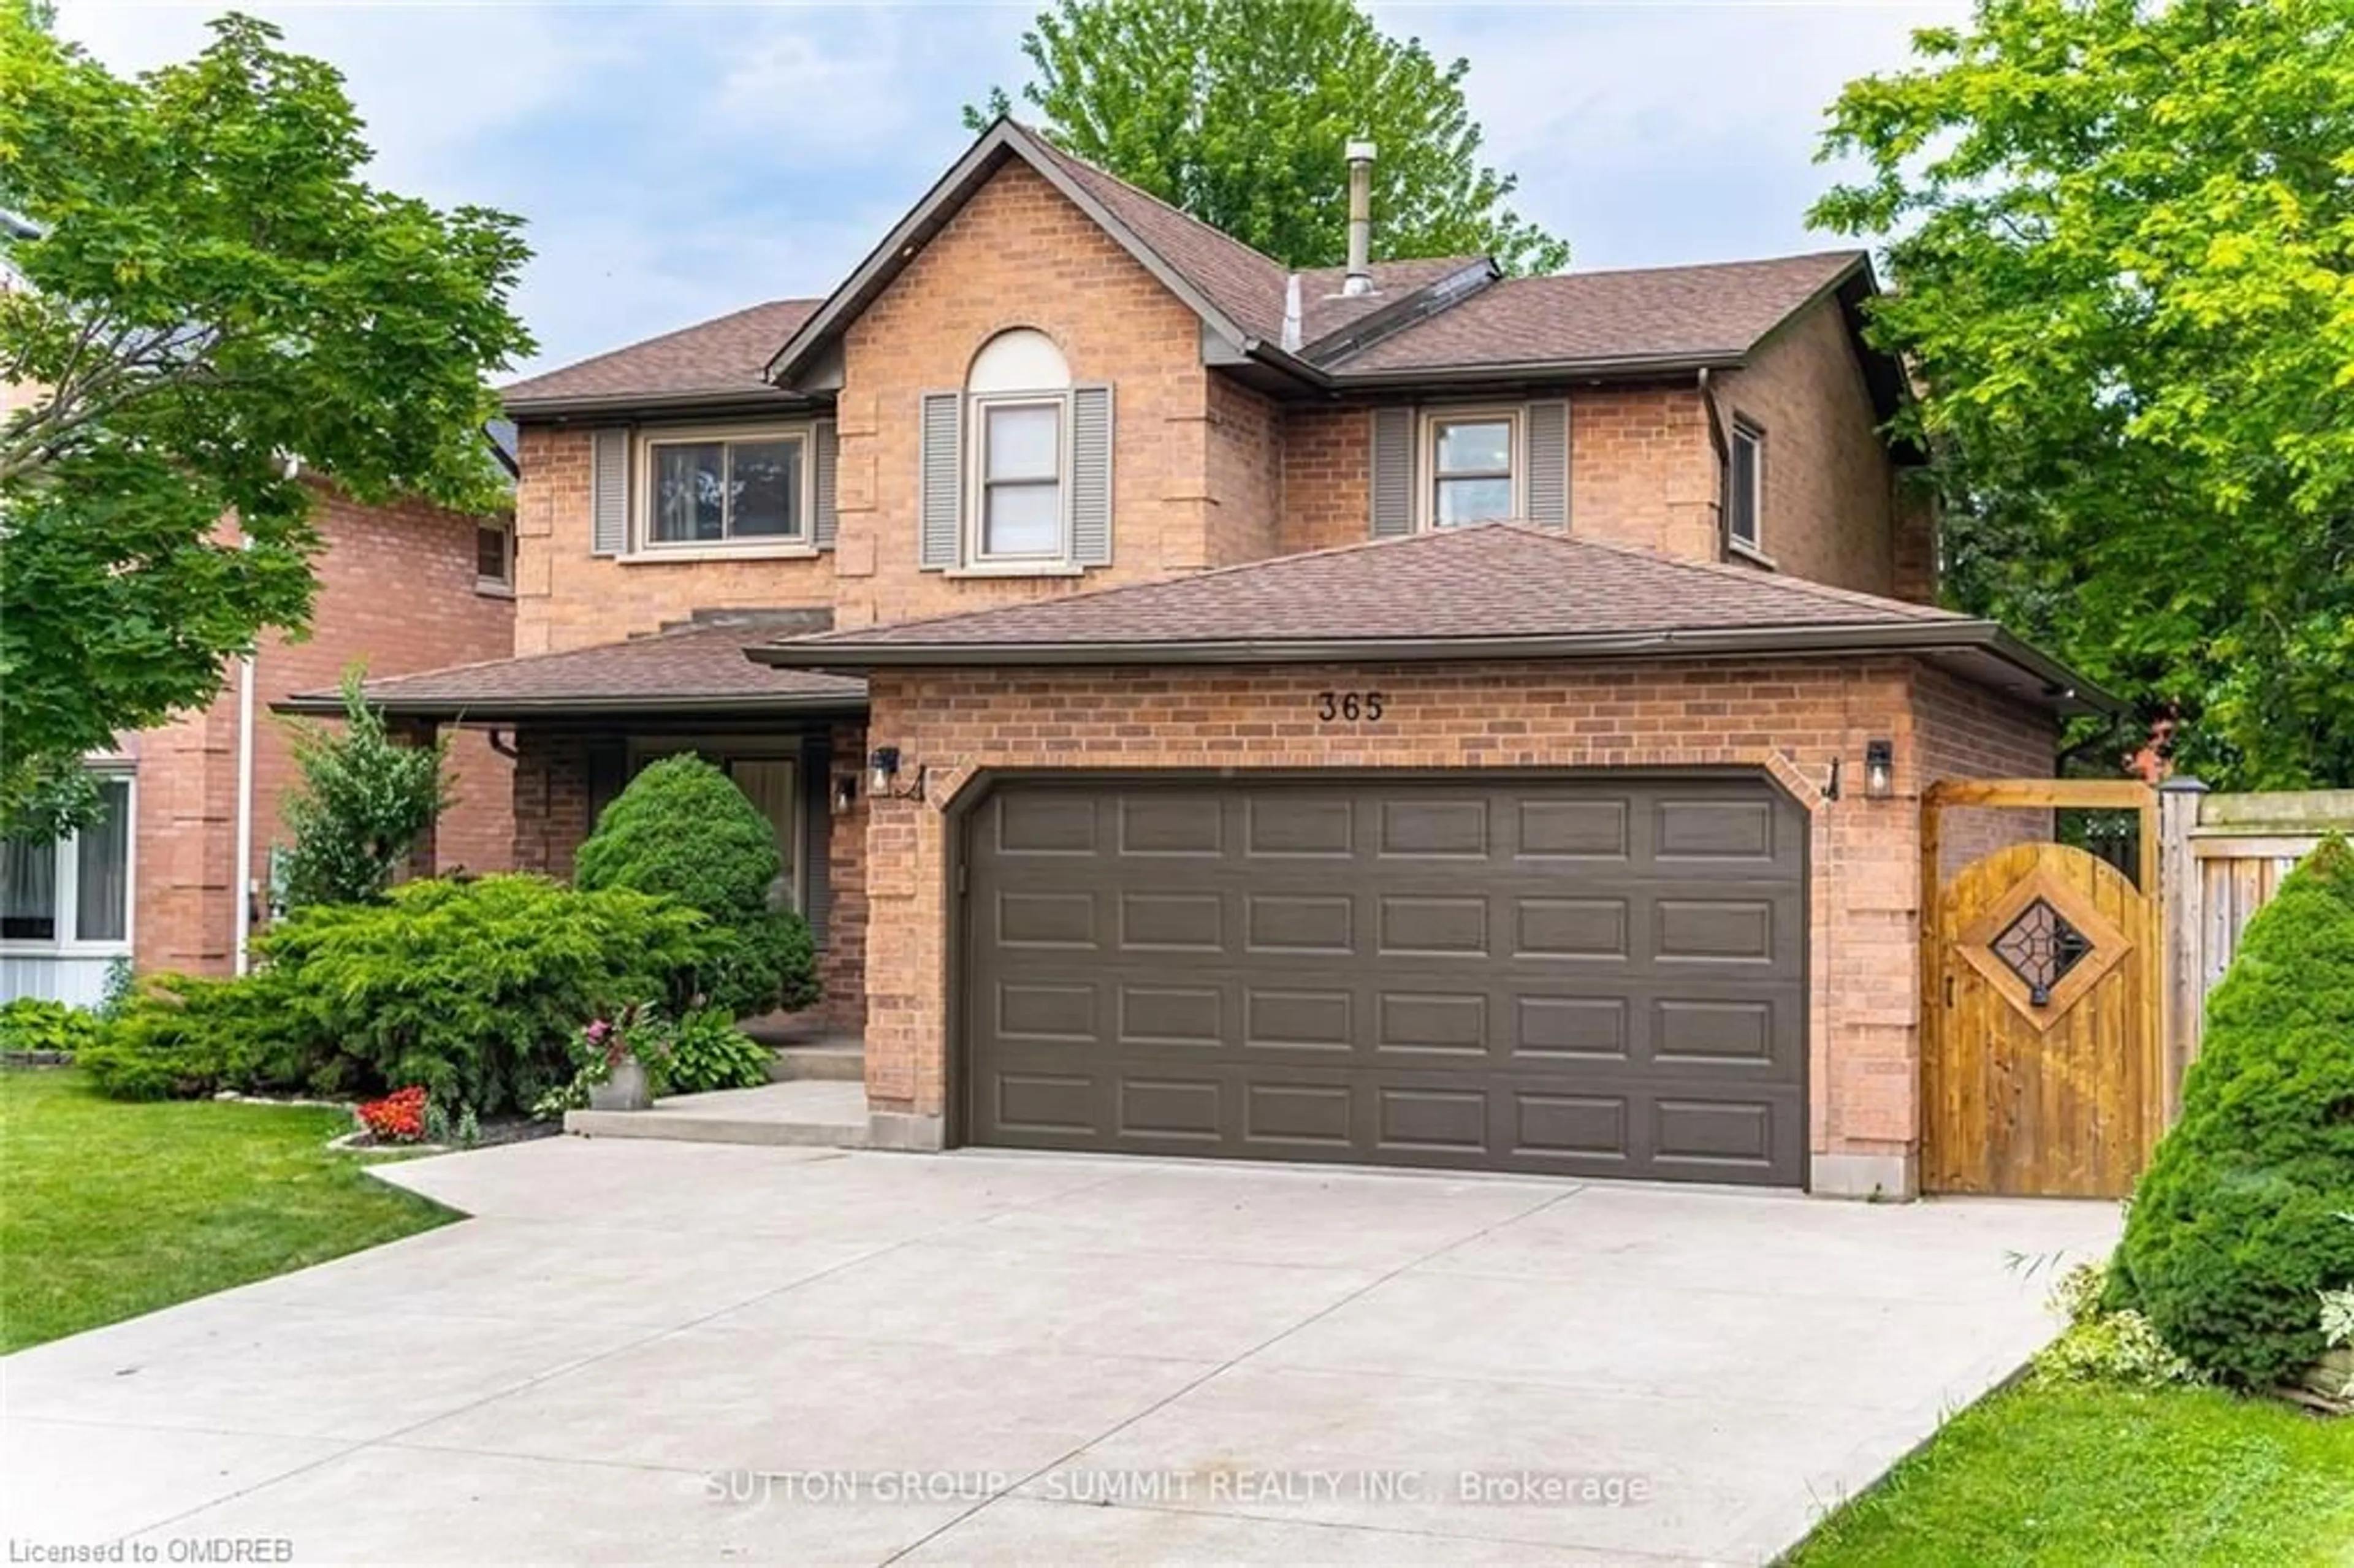 Home with brick exterior material for 365 Celtic Dr, Hamilton Ontario L8E 4N1